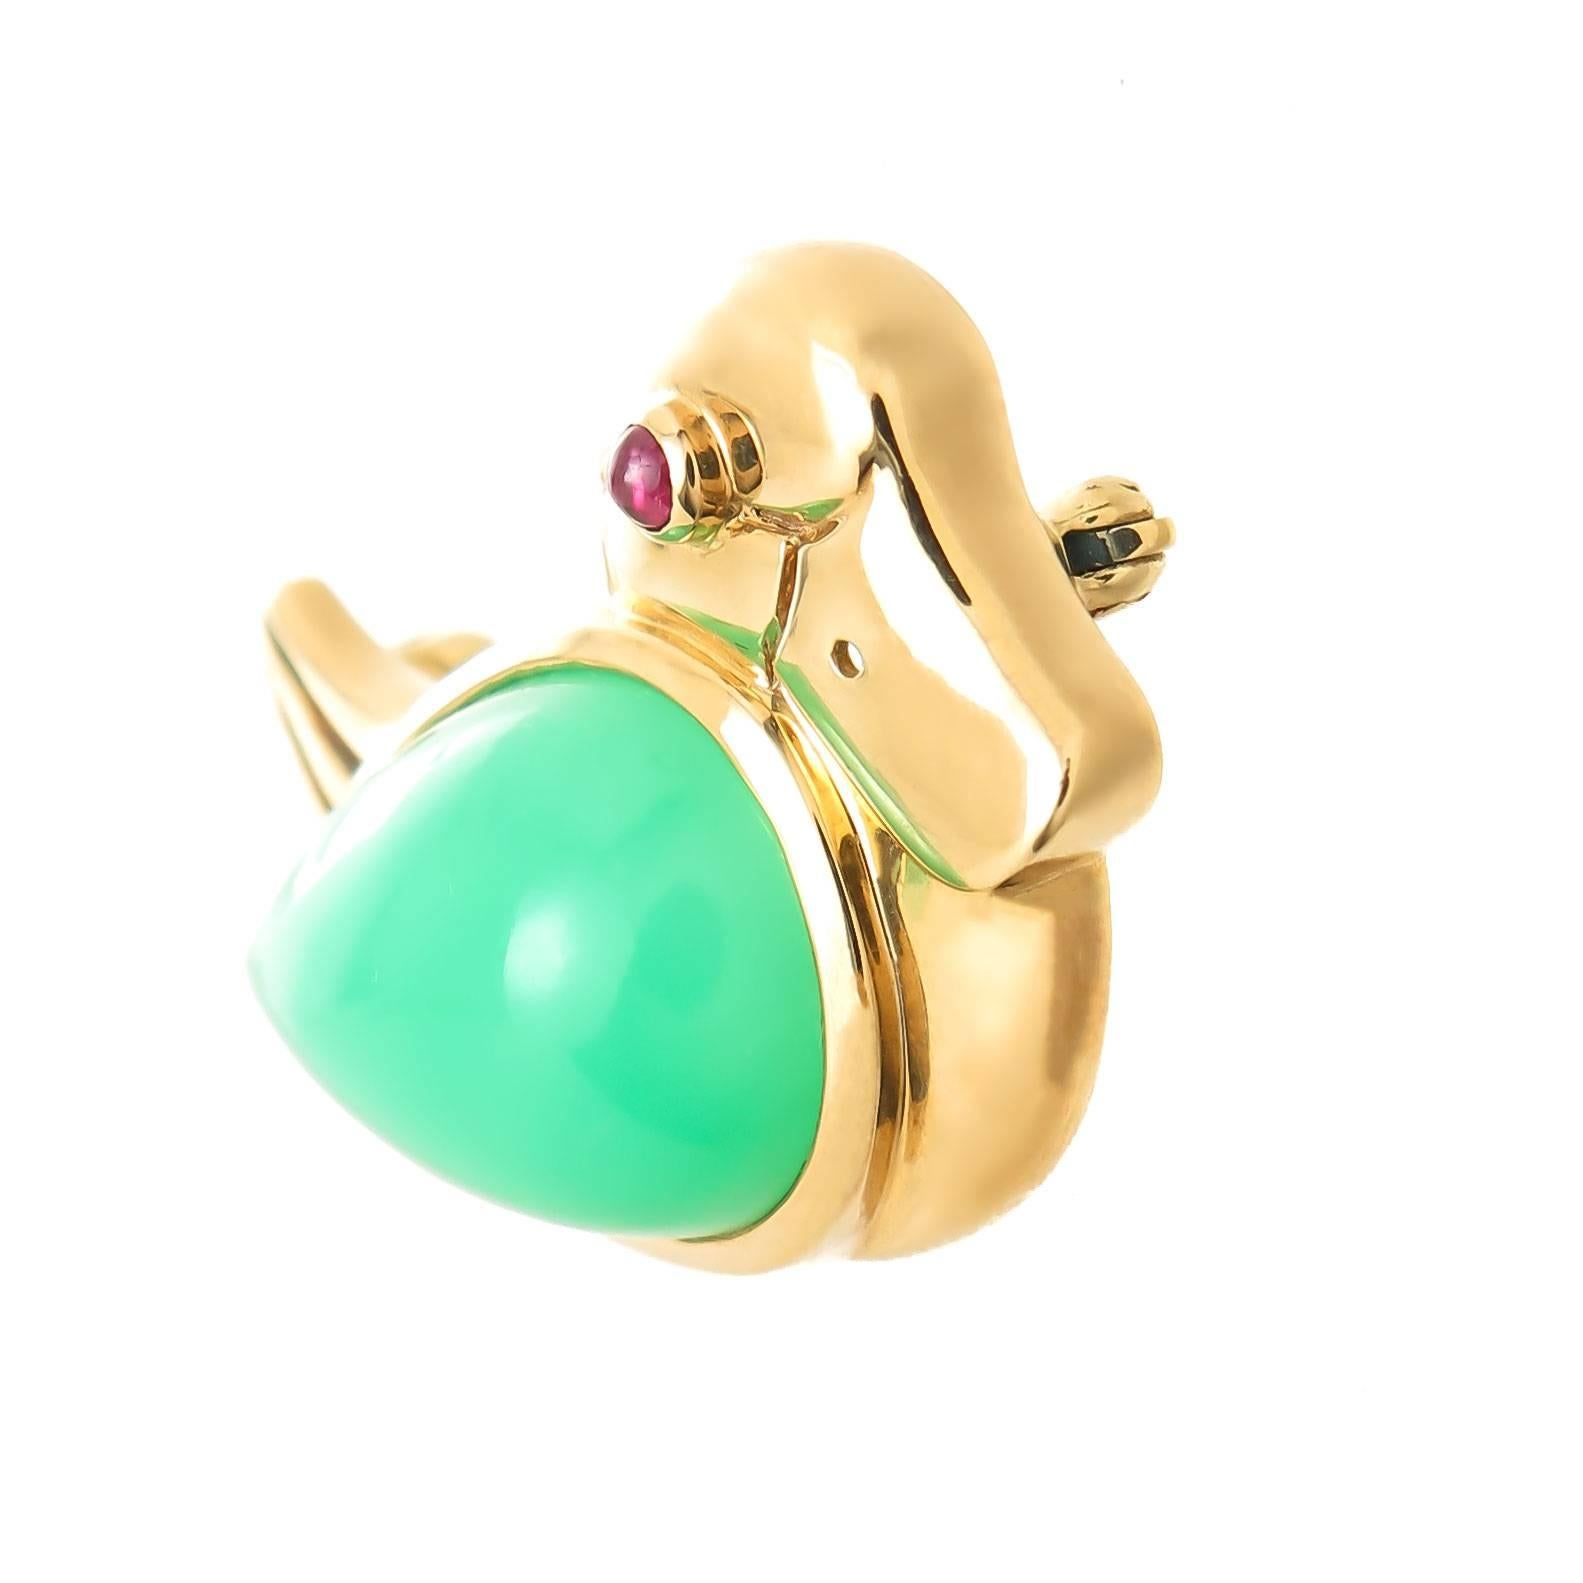 Circa 1990 Tiffany & company 18k yellow Gold Duck brooch, centrally set with a Chrysoprase and a Ruby Eye, measuring 1 1/4 inch in length X 7/8 inch. 